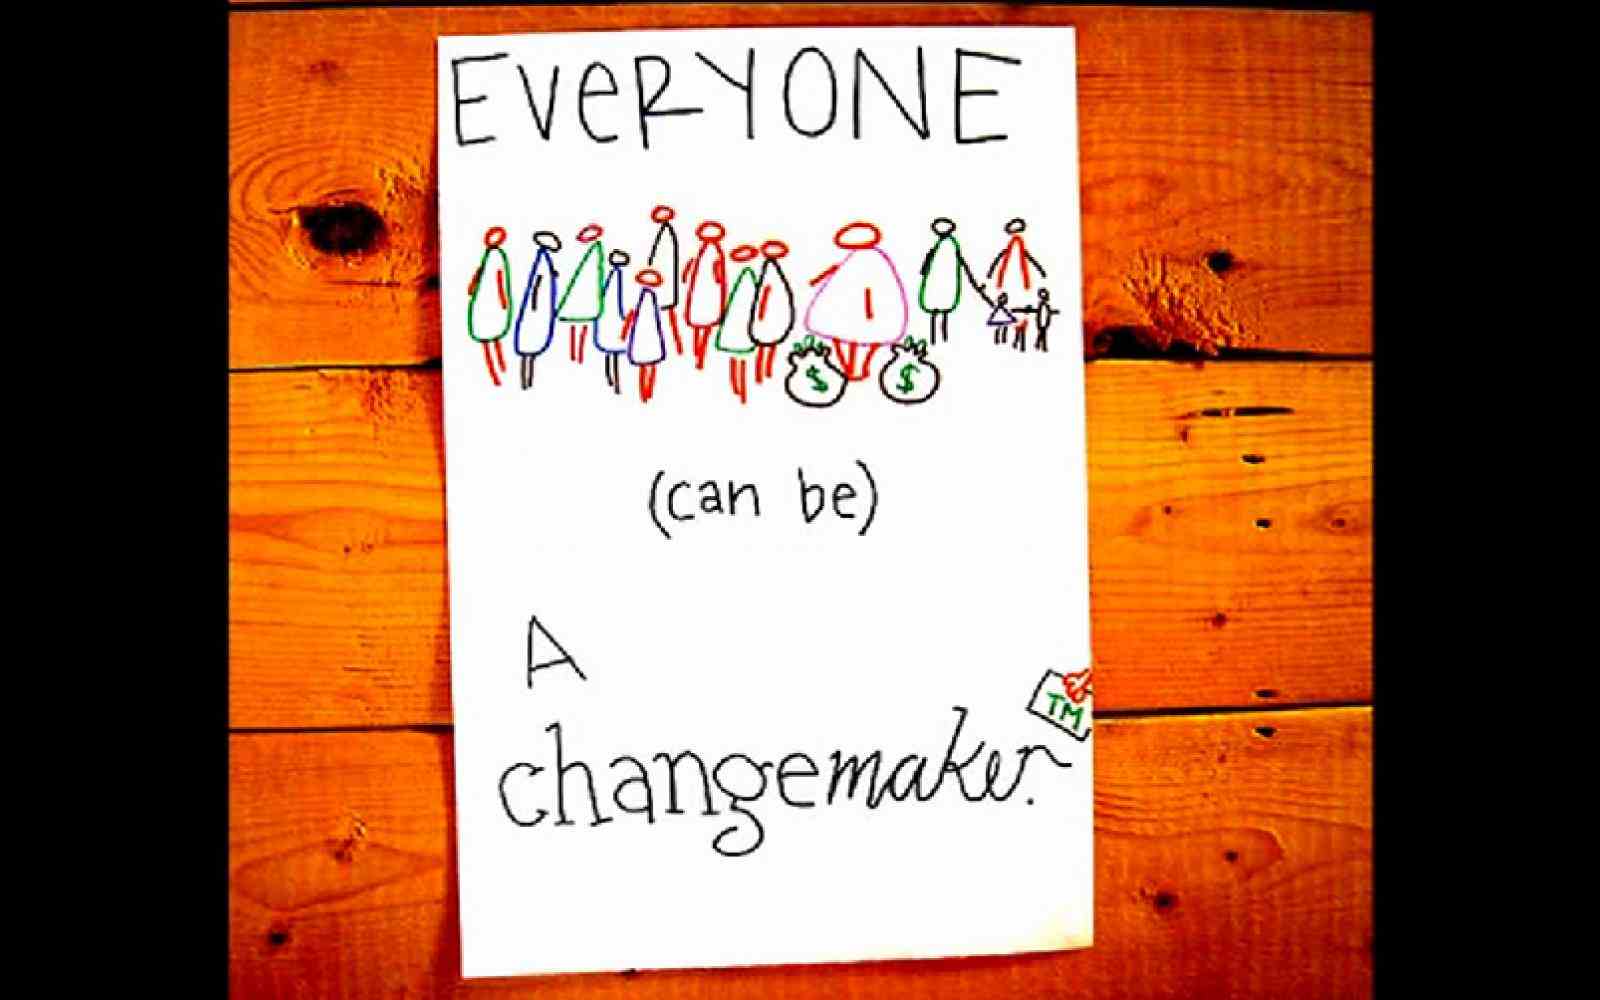 Everyone can be a changemaker